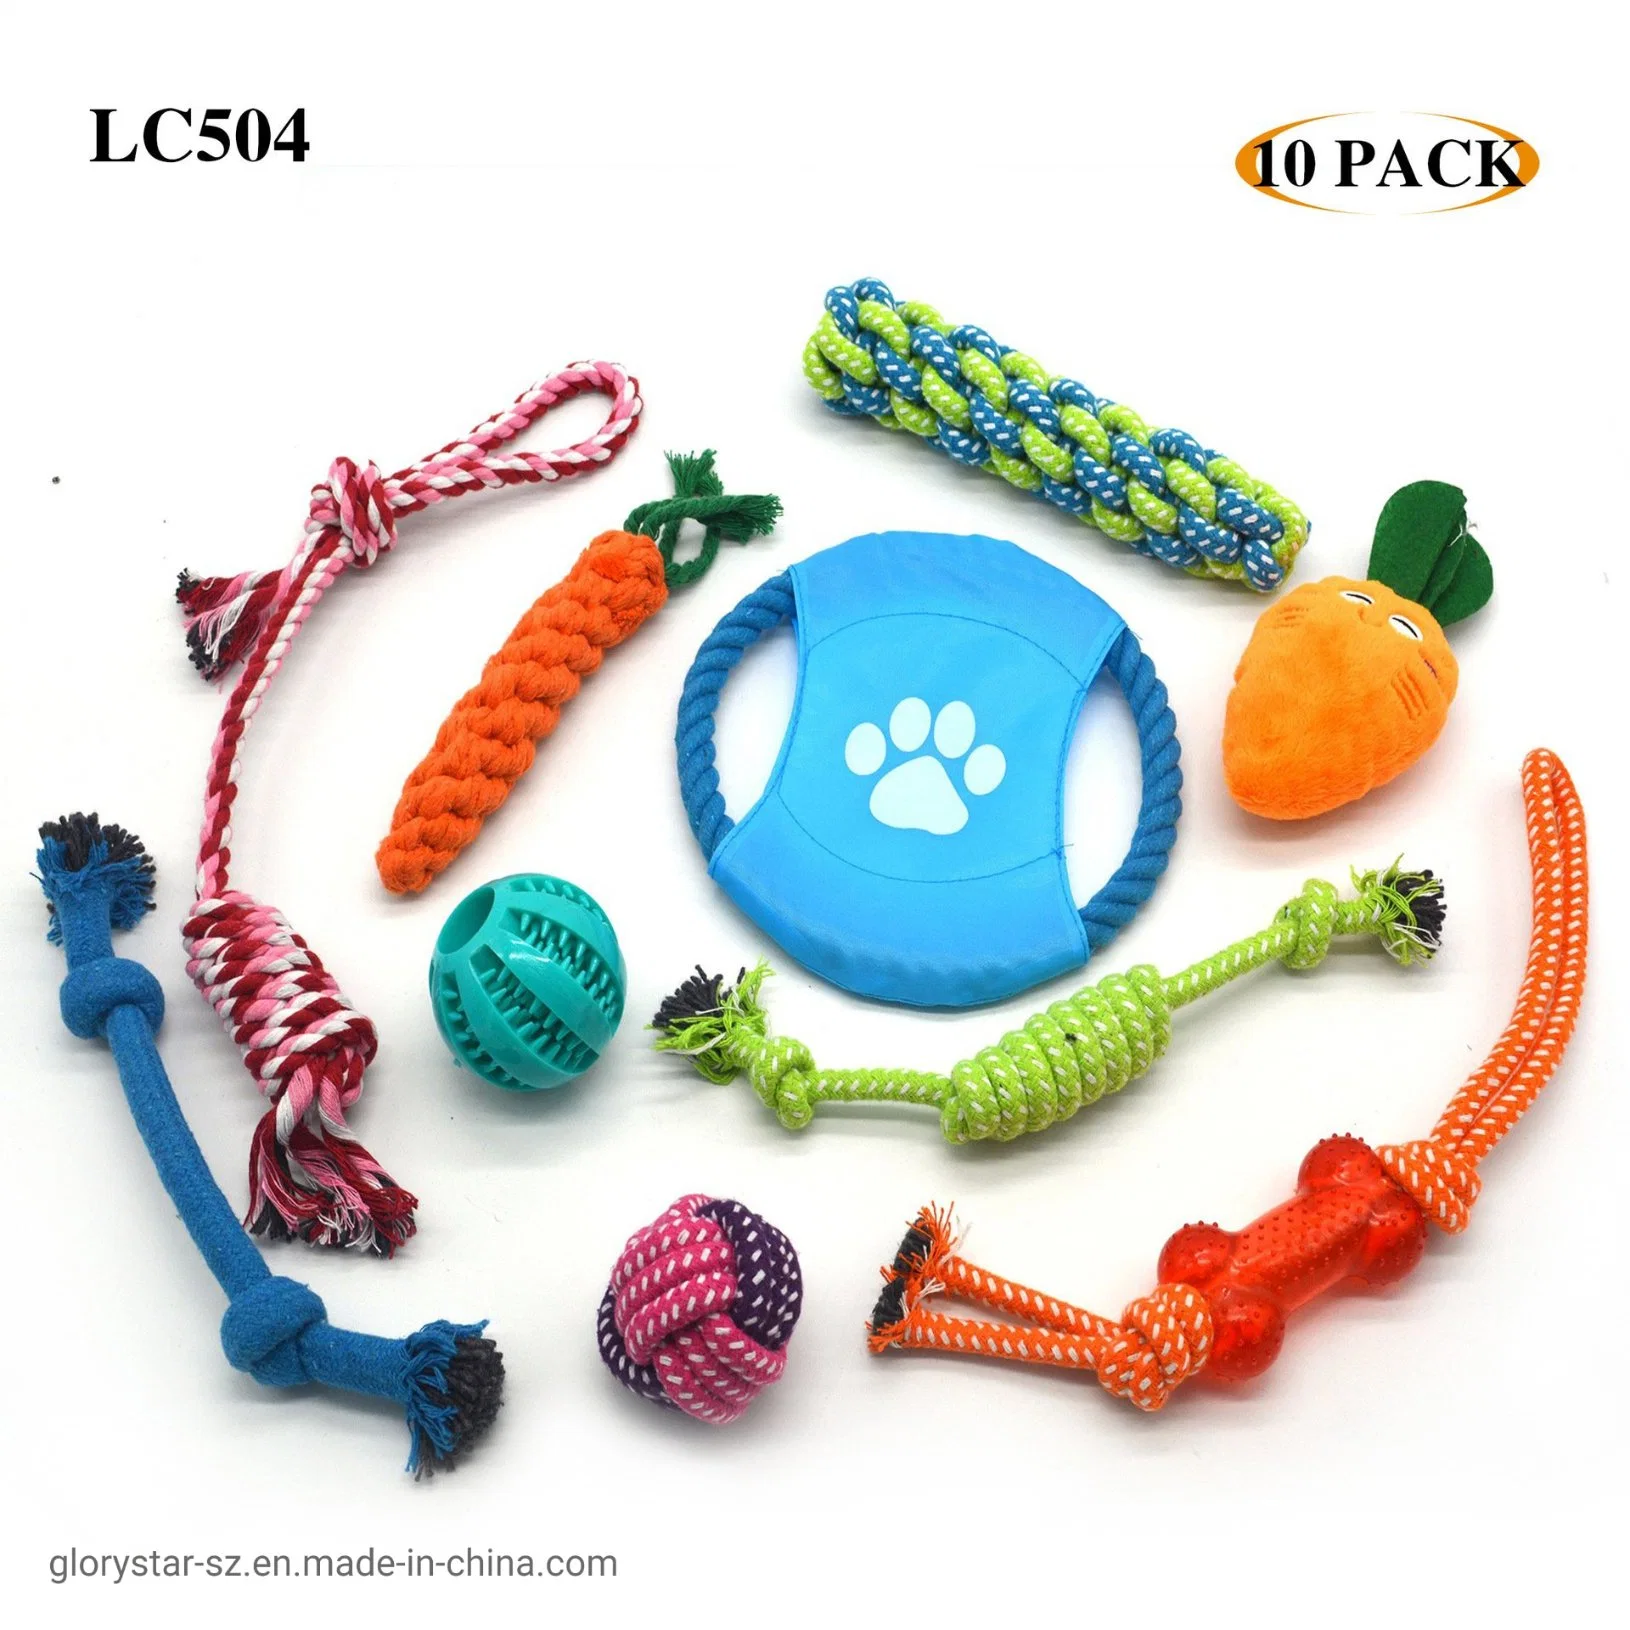 Puppy and Small Dog Pet Teething Squeaky Chew Toys Pack